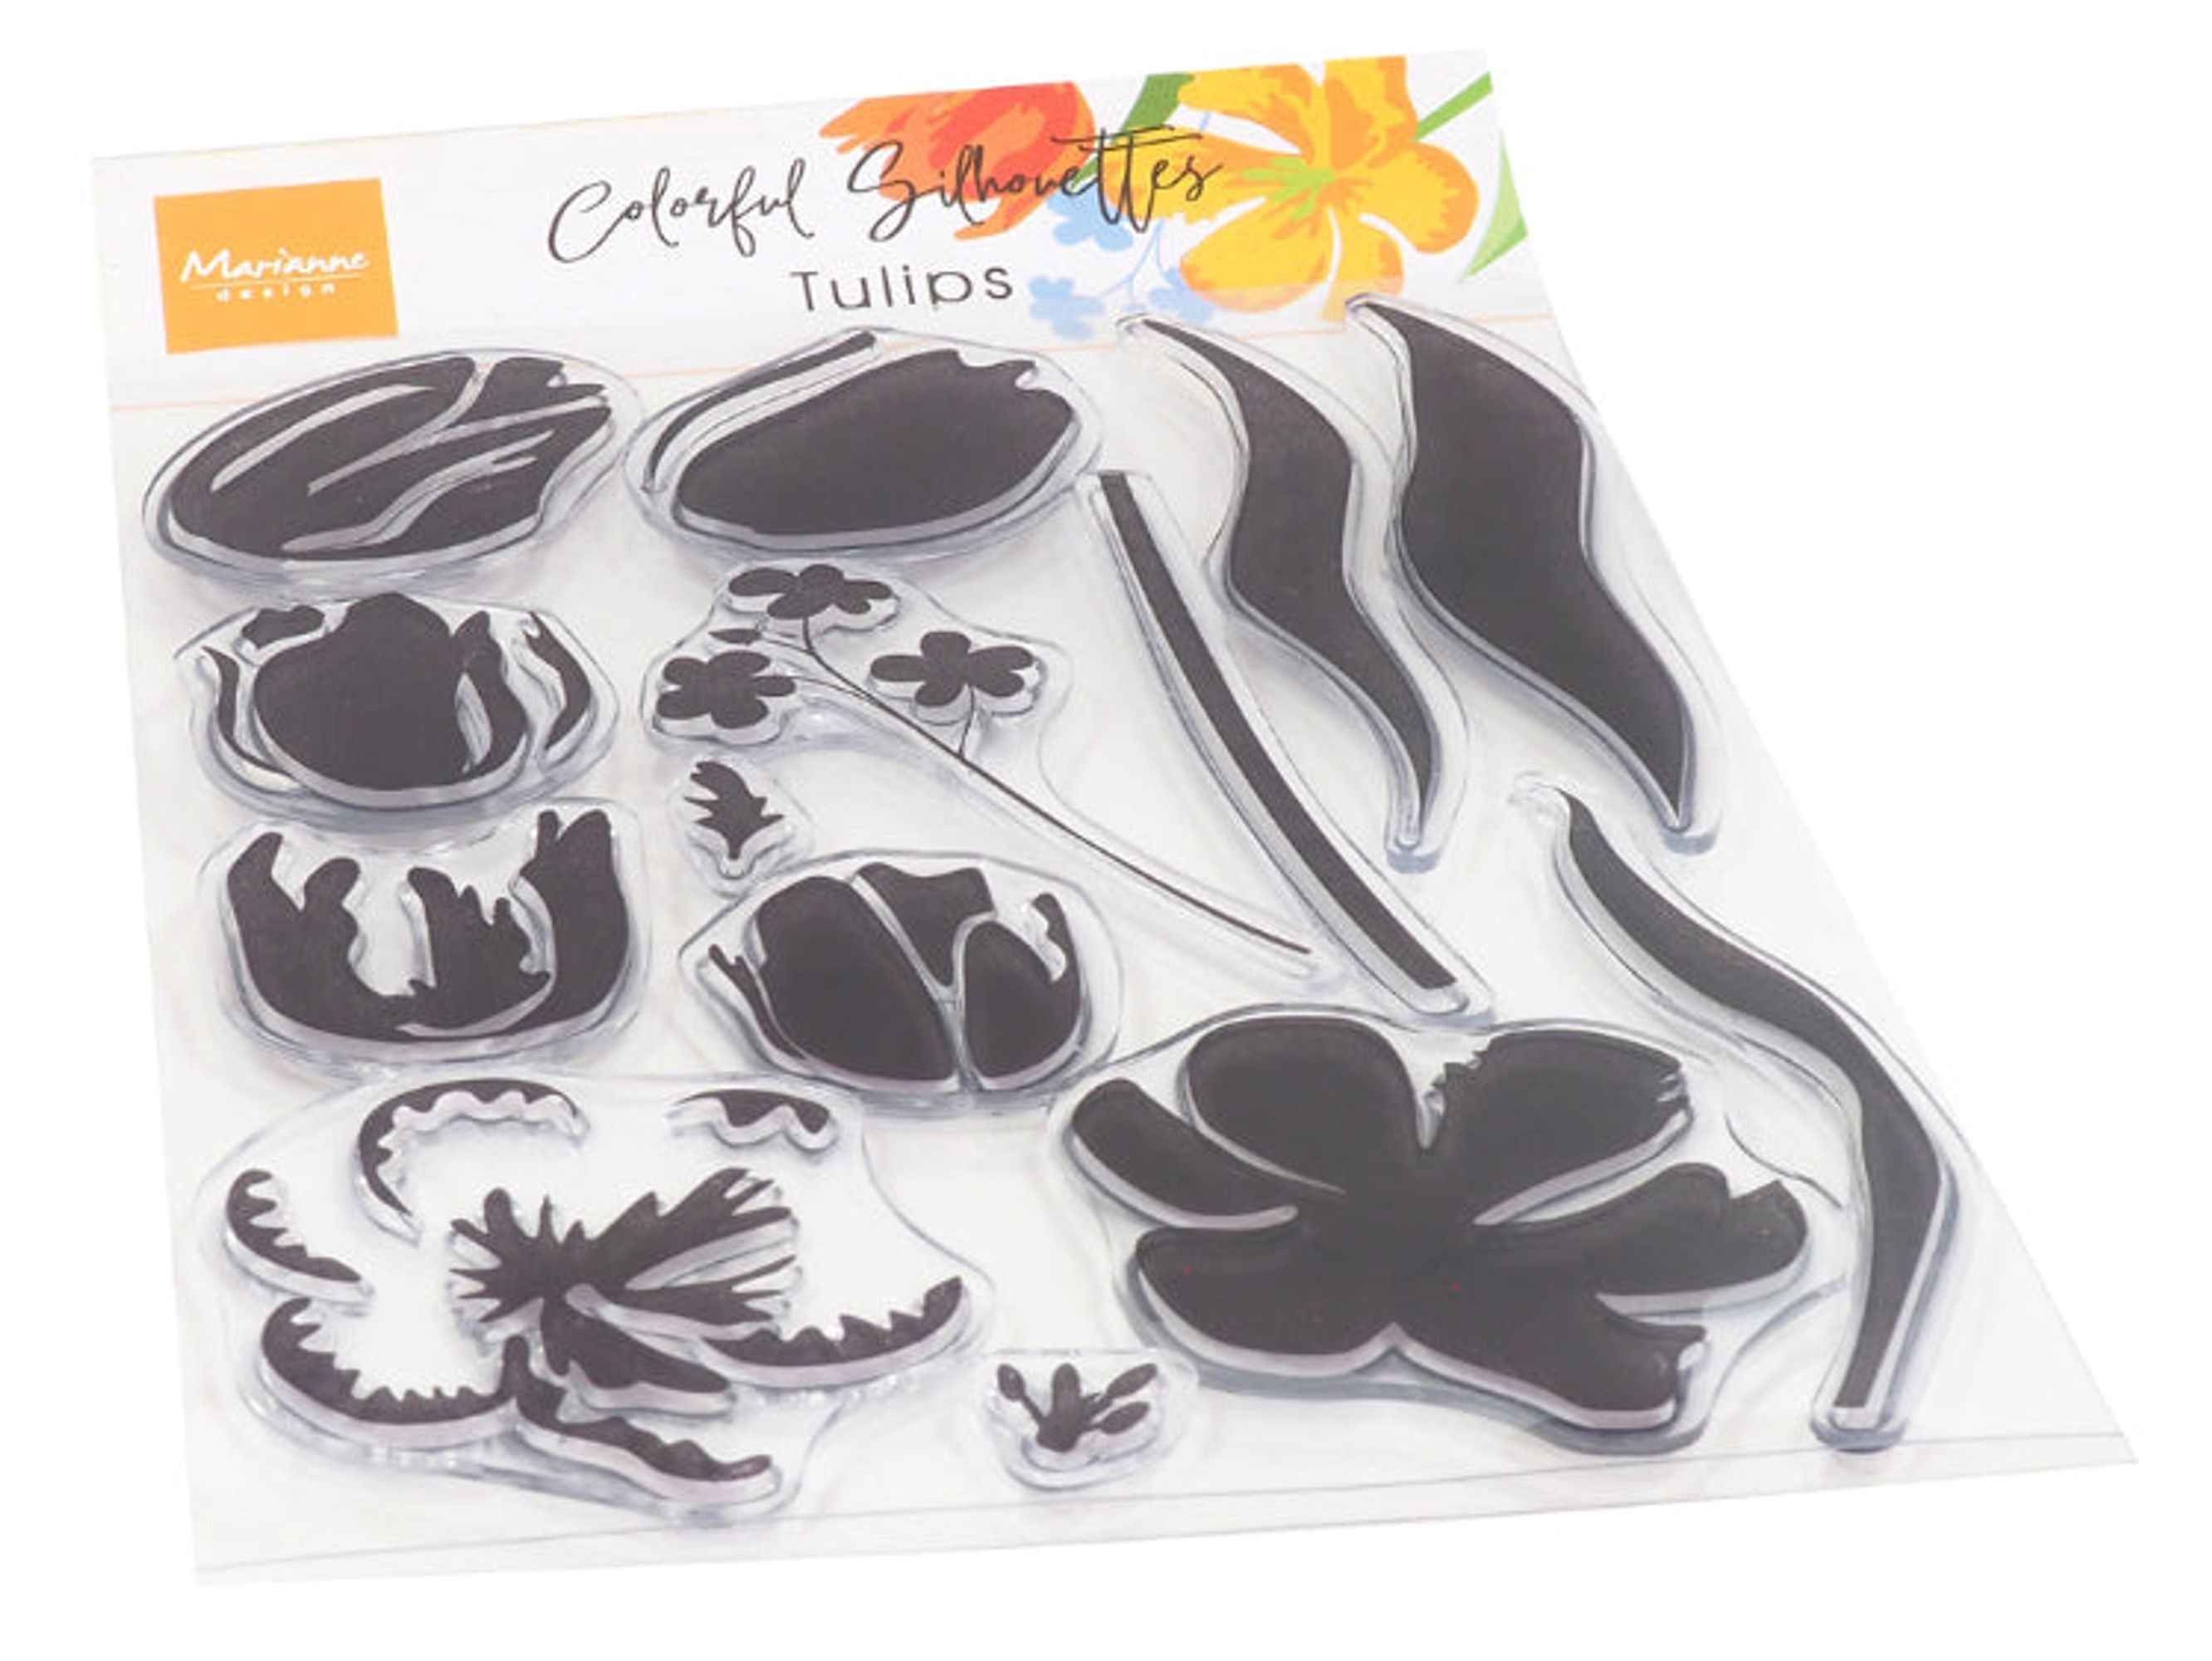 Colorful Silhouettes Tulips Clear Stamps